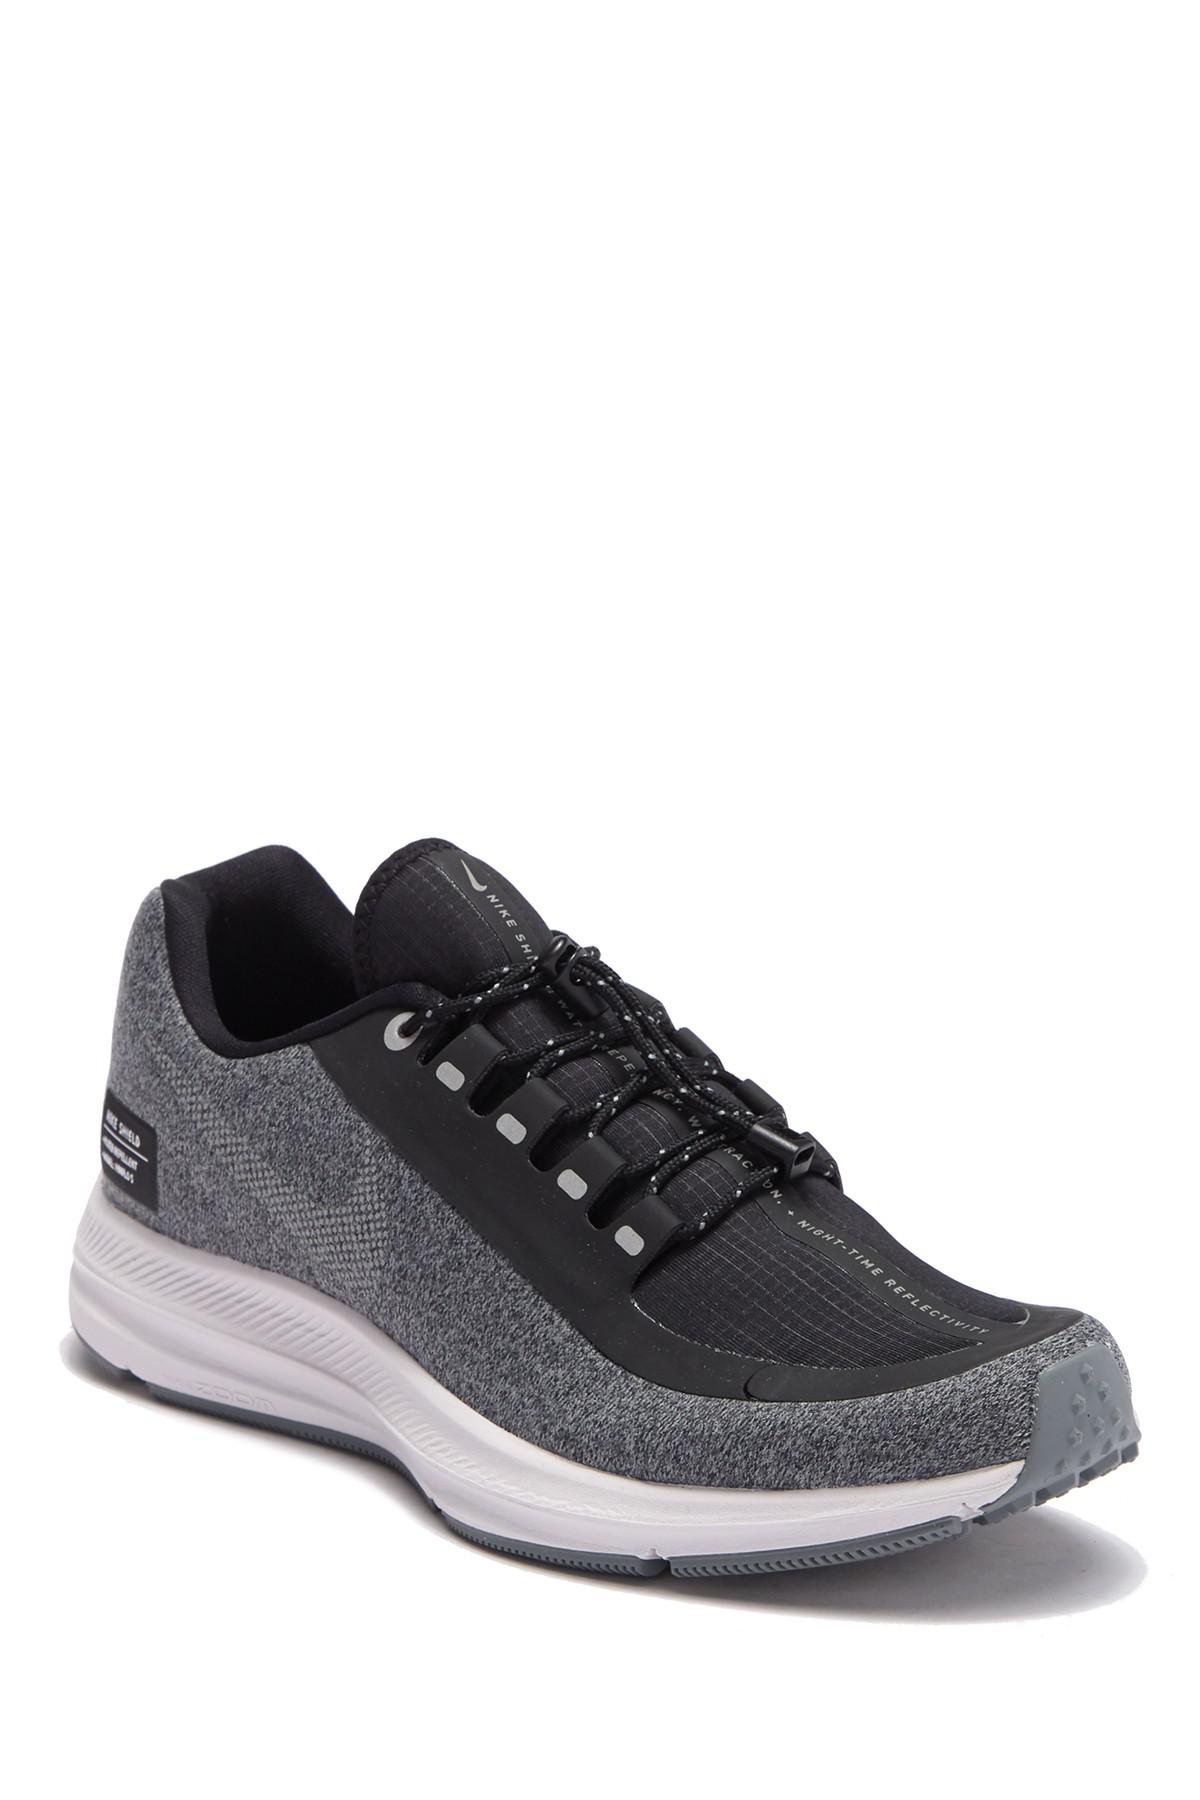 Nike Synthetic Zoom Winflo 5 Shield Athletic Shoe in Grey (Black) - Save  40% - Lyst